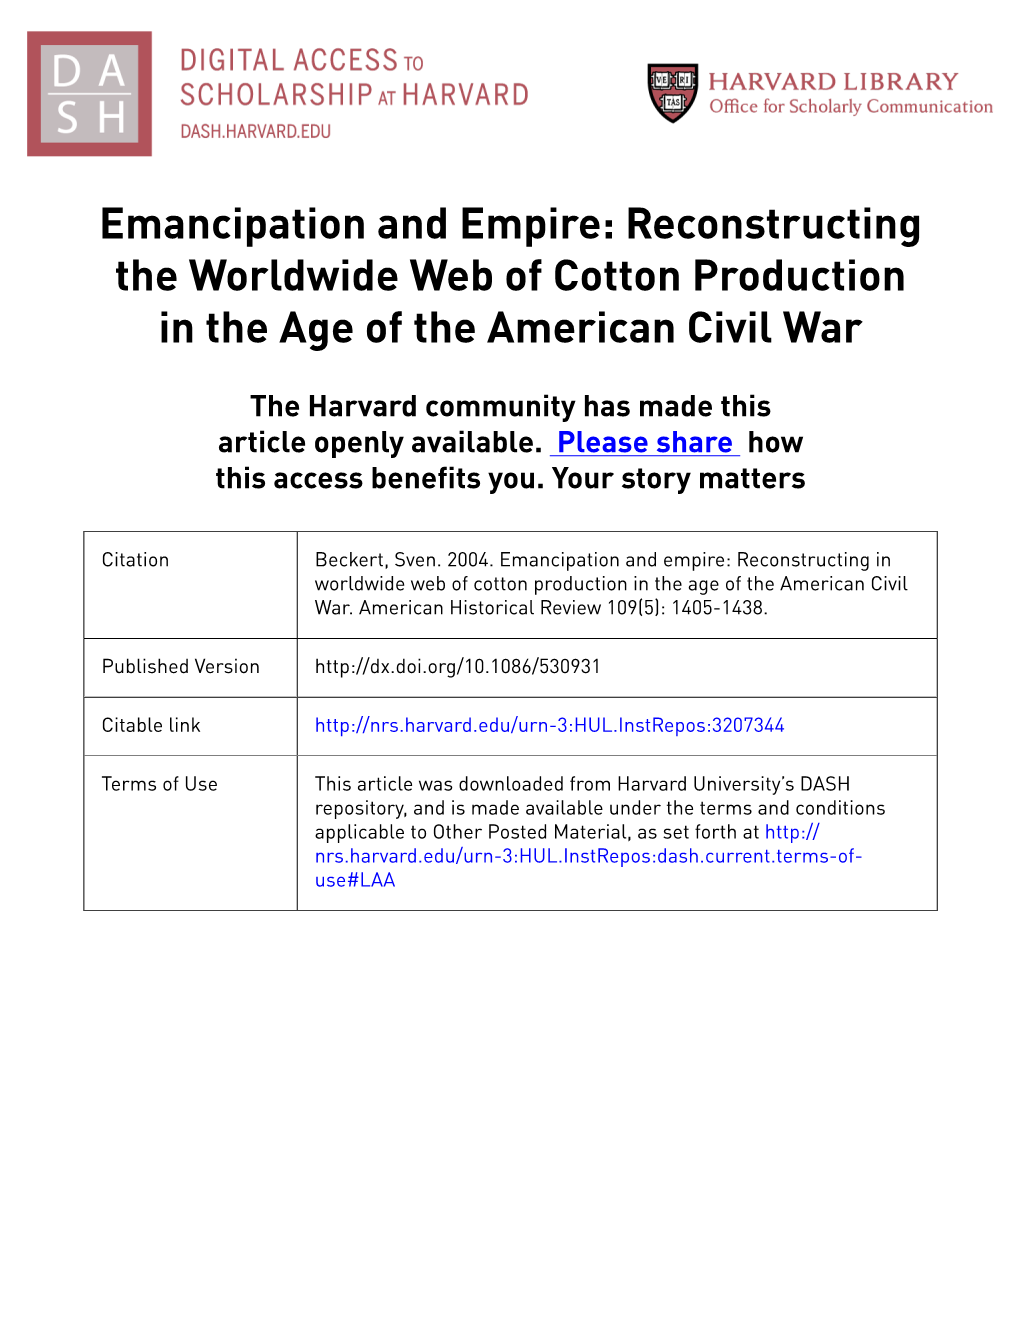 Emancipation and Empire: Reconstructing the Worldwide Web of Cotton Production in the Age of the American Civil War